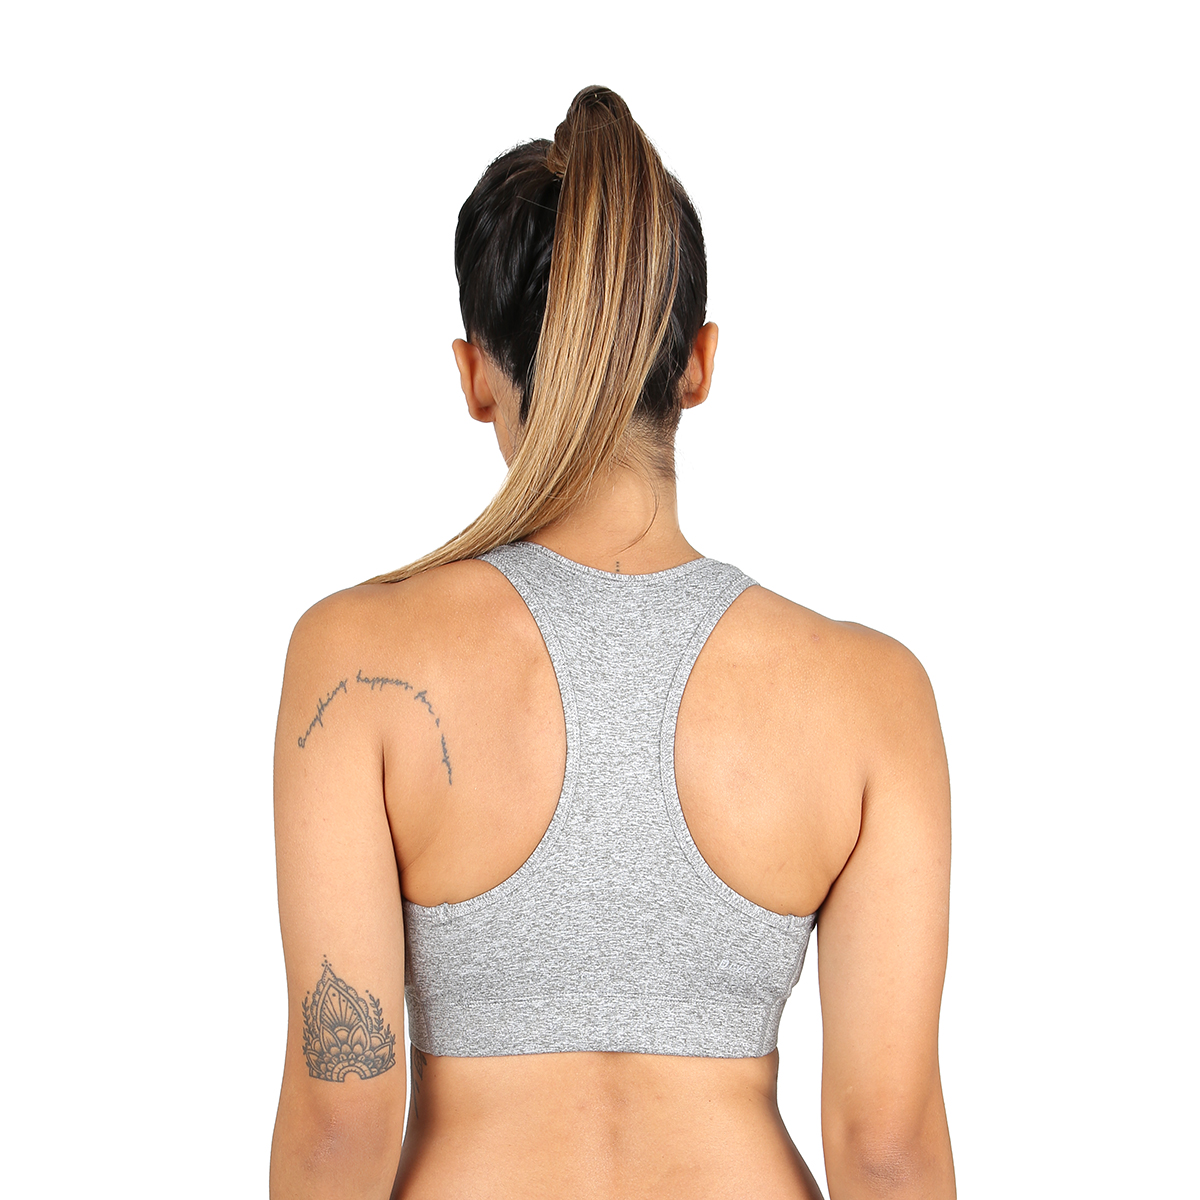 Top Entrenamiento Topper Basic Mujer,  image number null